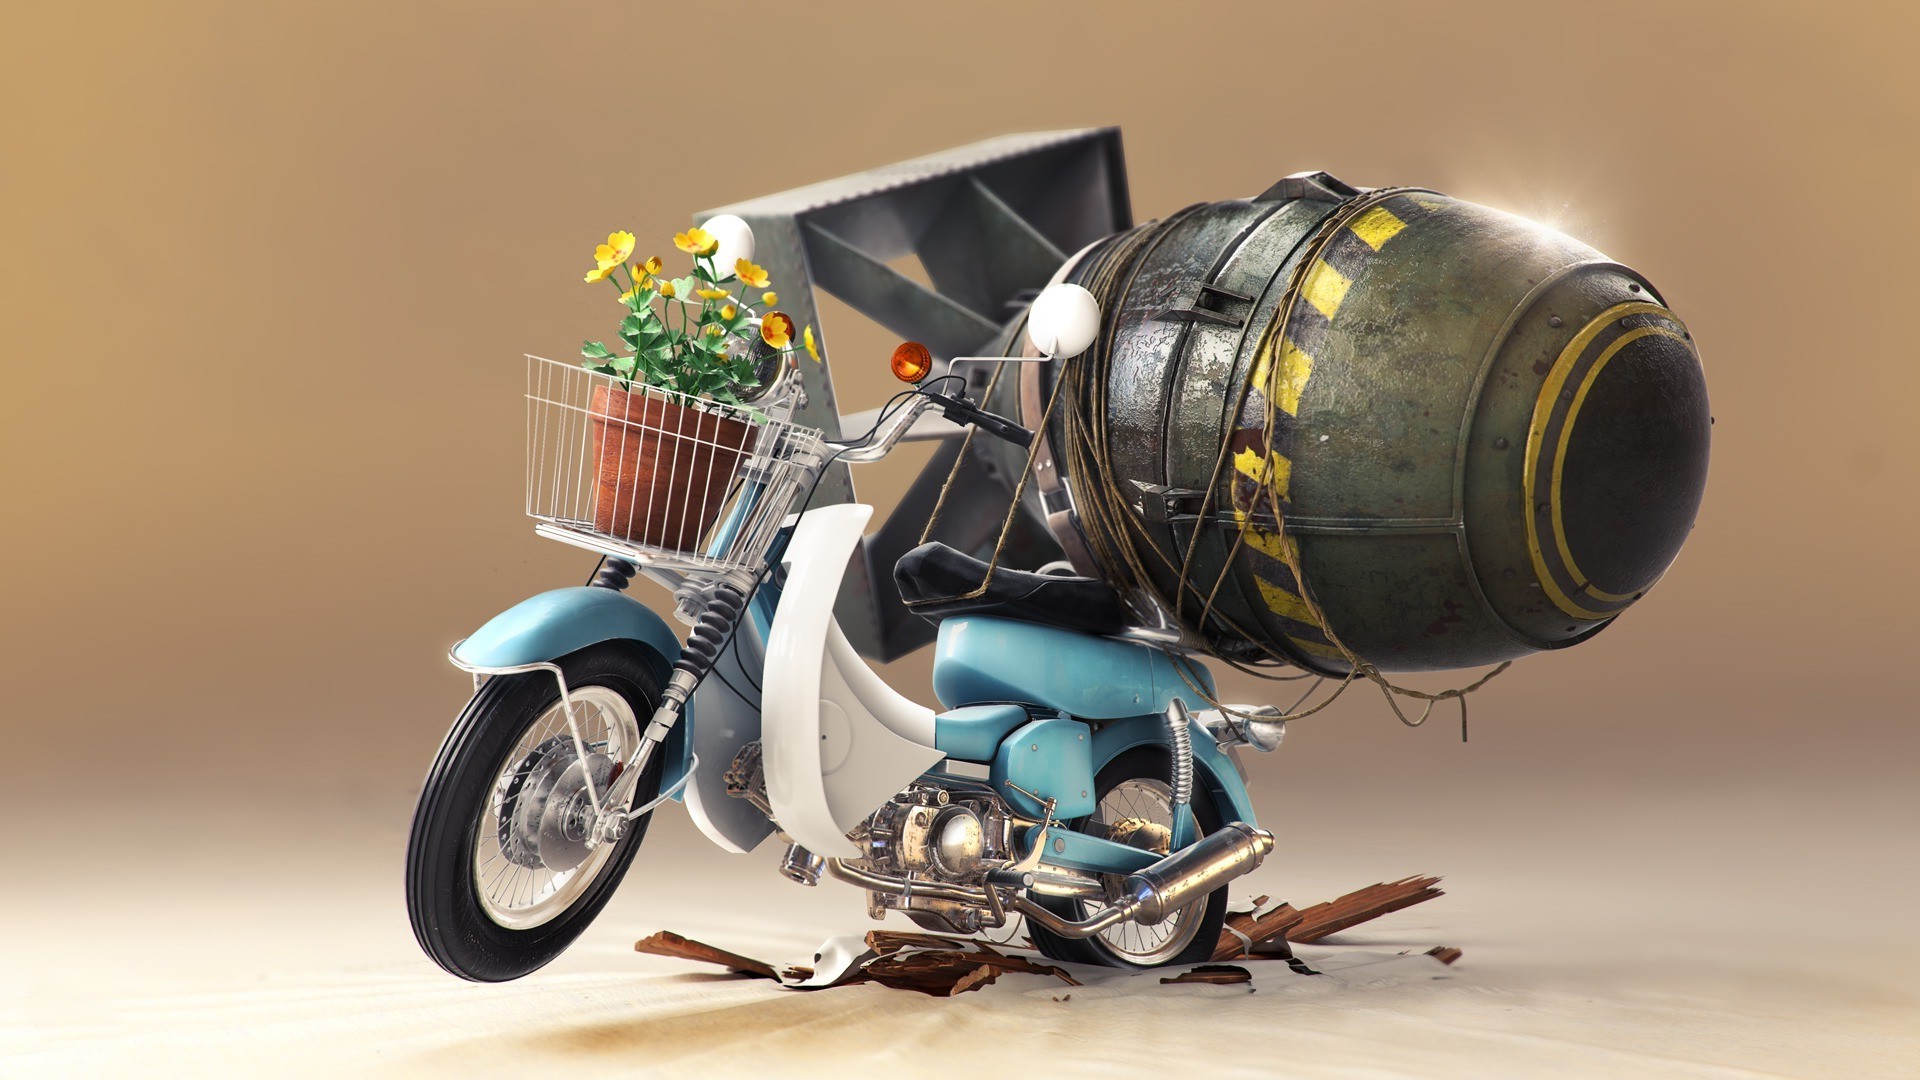 General 1920x1080 flowerpot yellow flowers bombs photo manipulation photoshopped atomic bomb beige background beige cyan flowers humor scooters